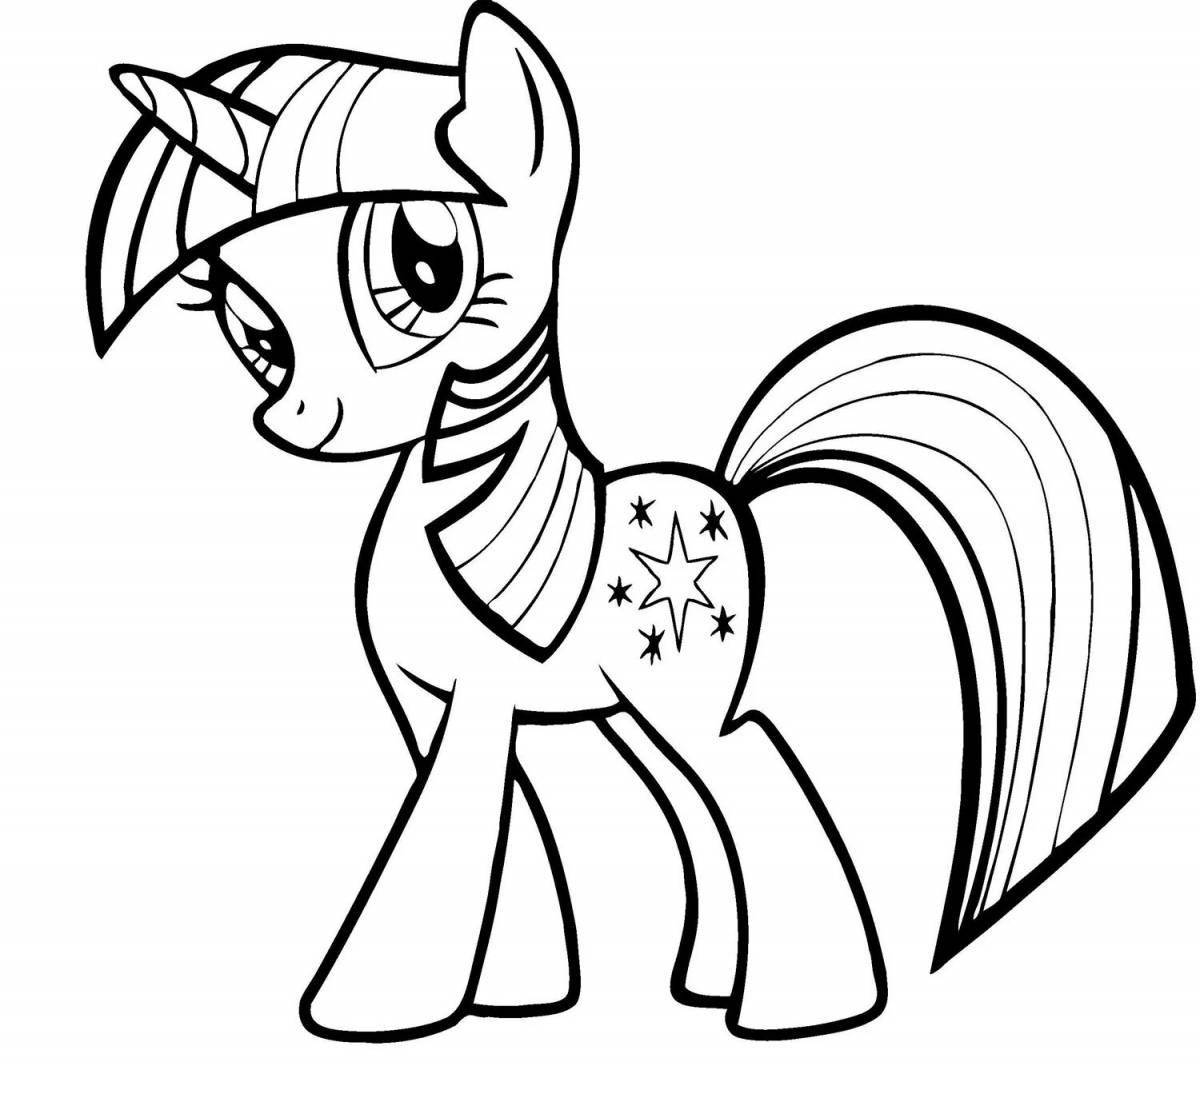 Coloring page charming watershine pony